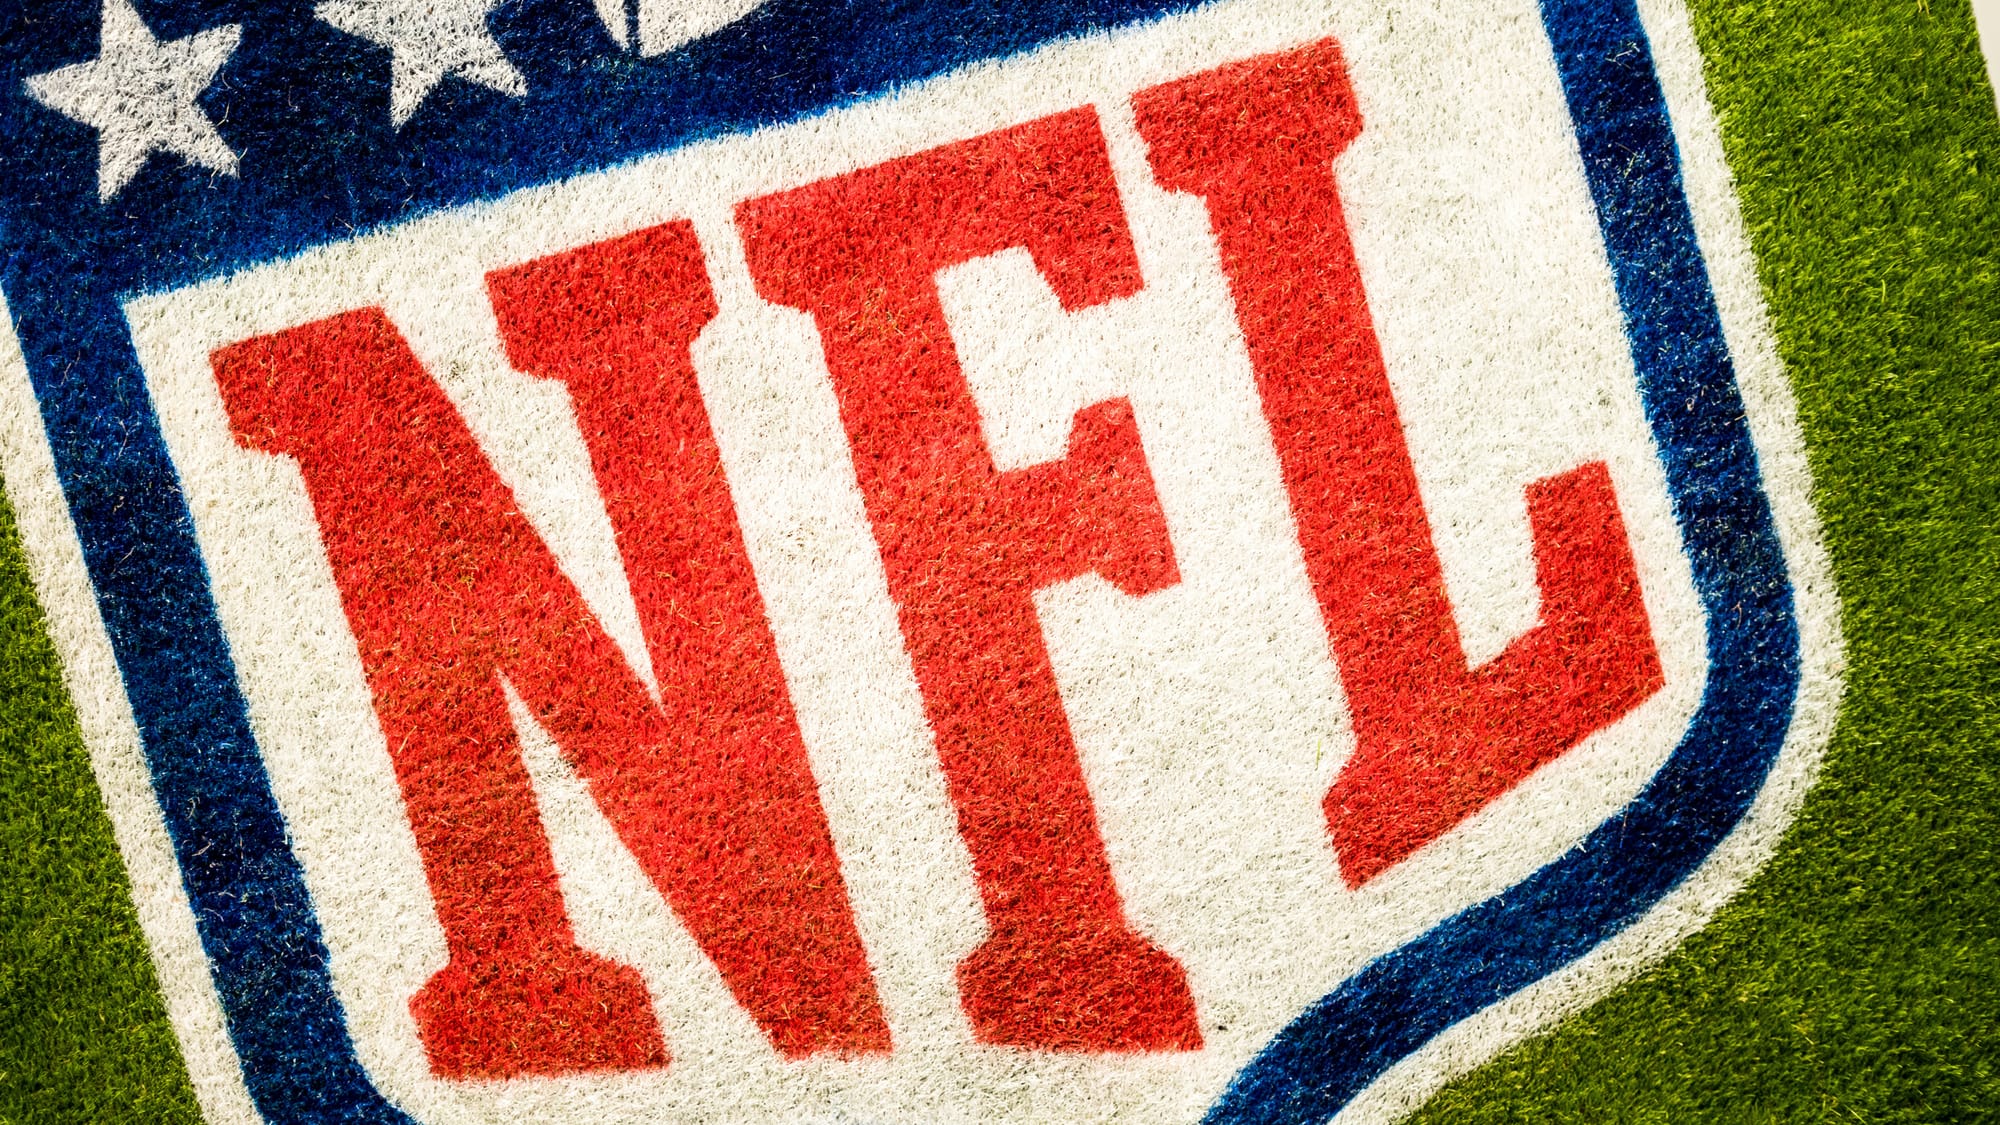 NFL Wild Card Weekend Propels NBC To No. 1 Network